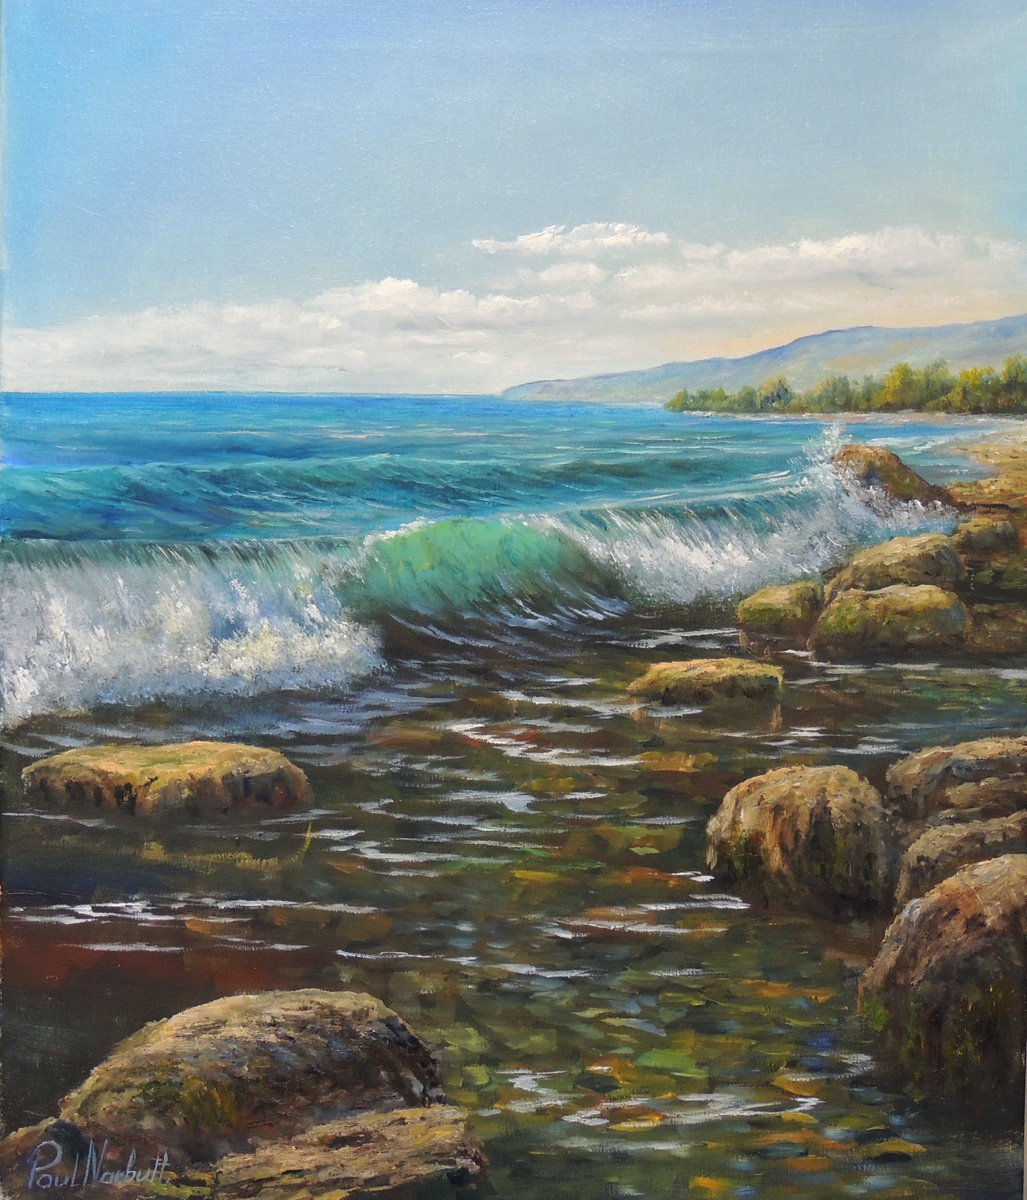 Waves are beating on the shore by Paul Narbutt